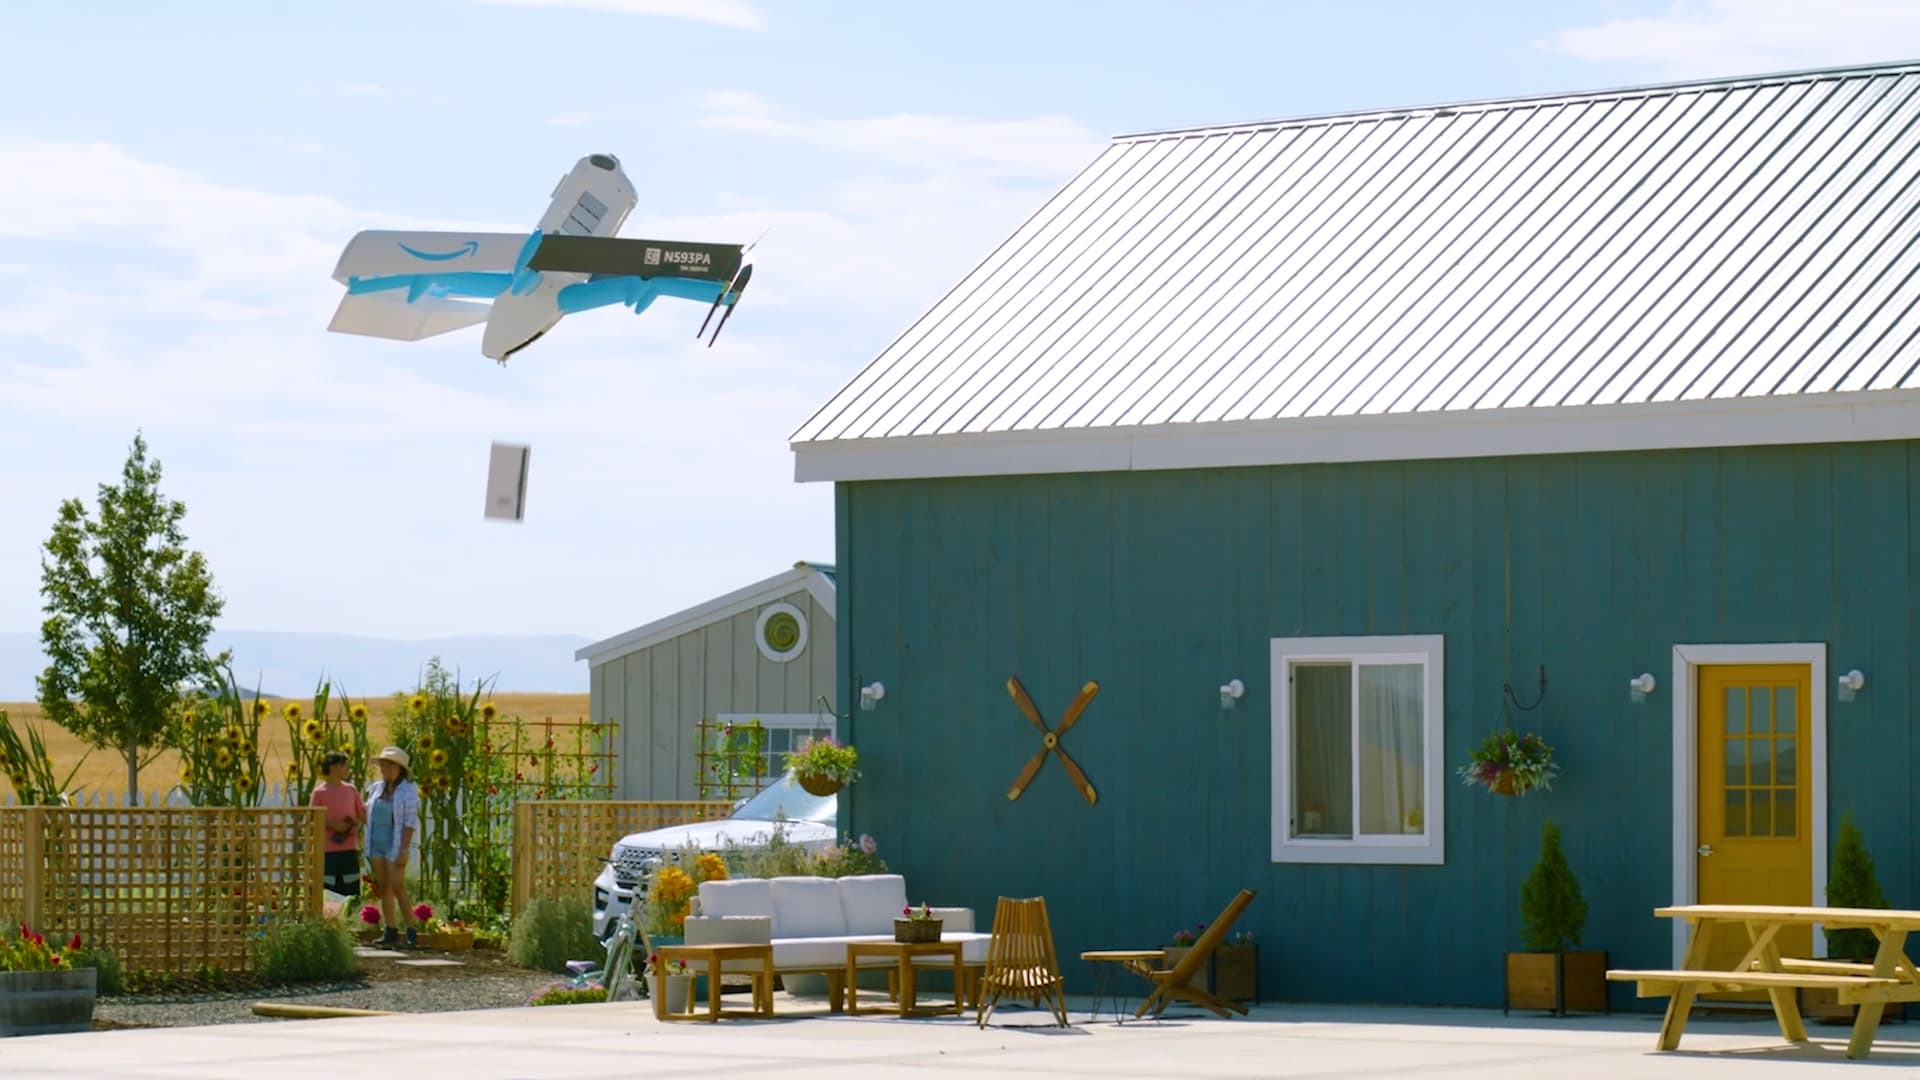 A first look at Amazon's new delivery drone